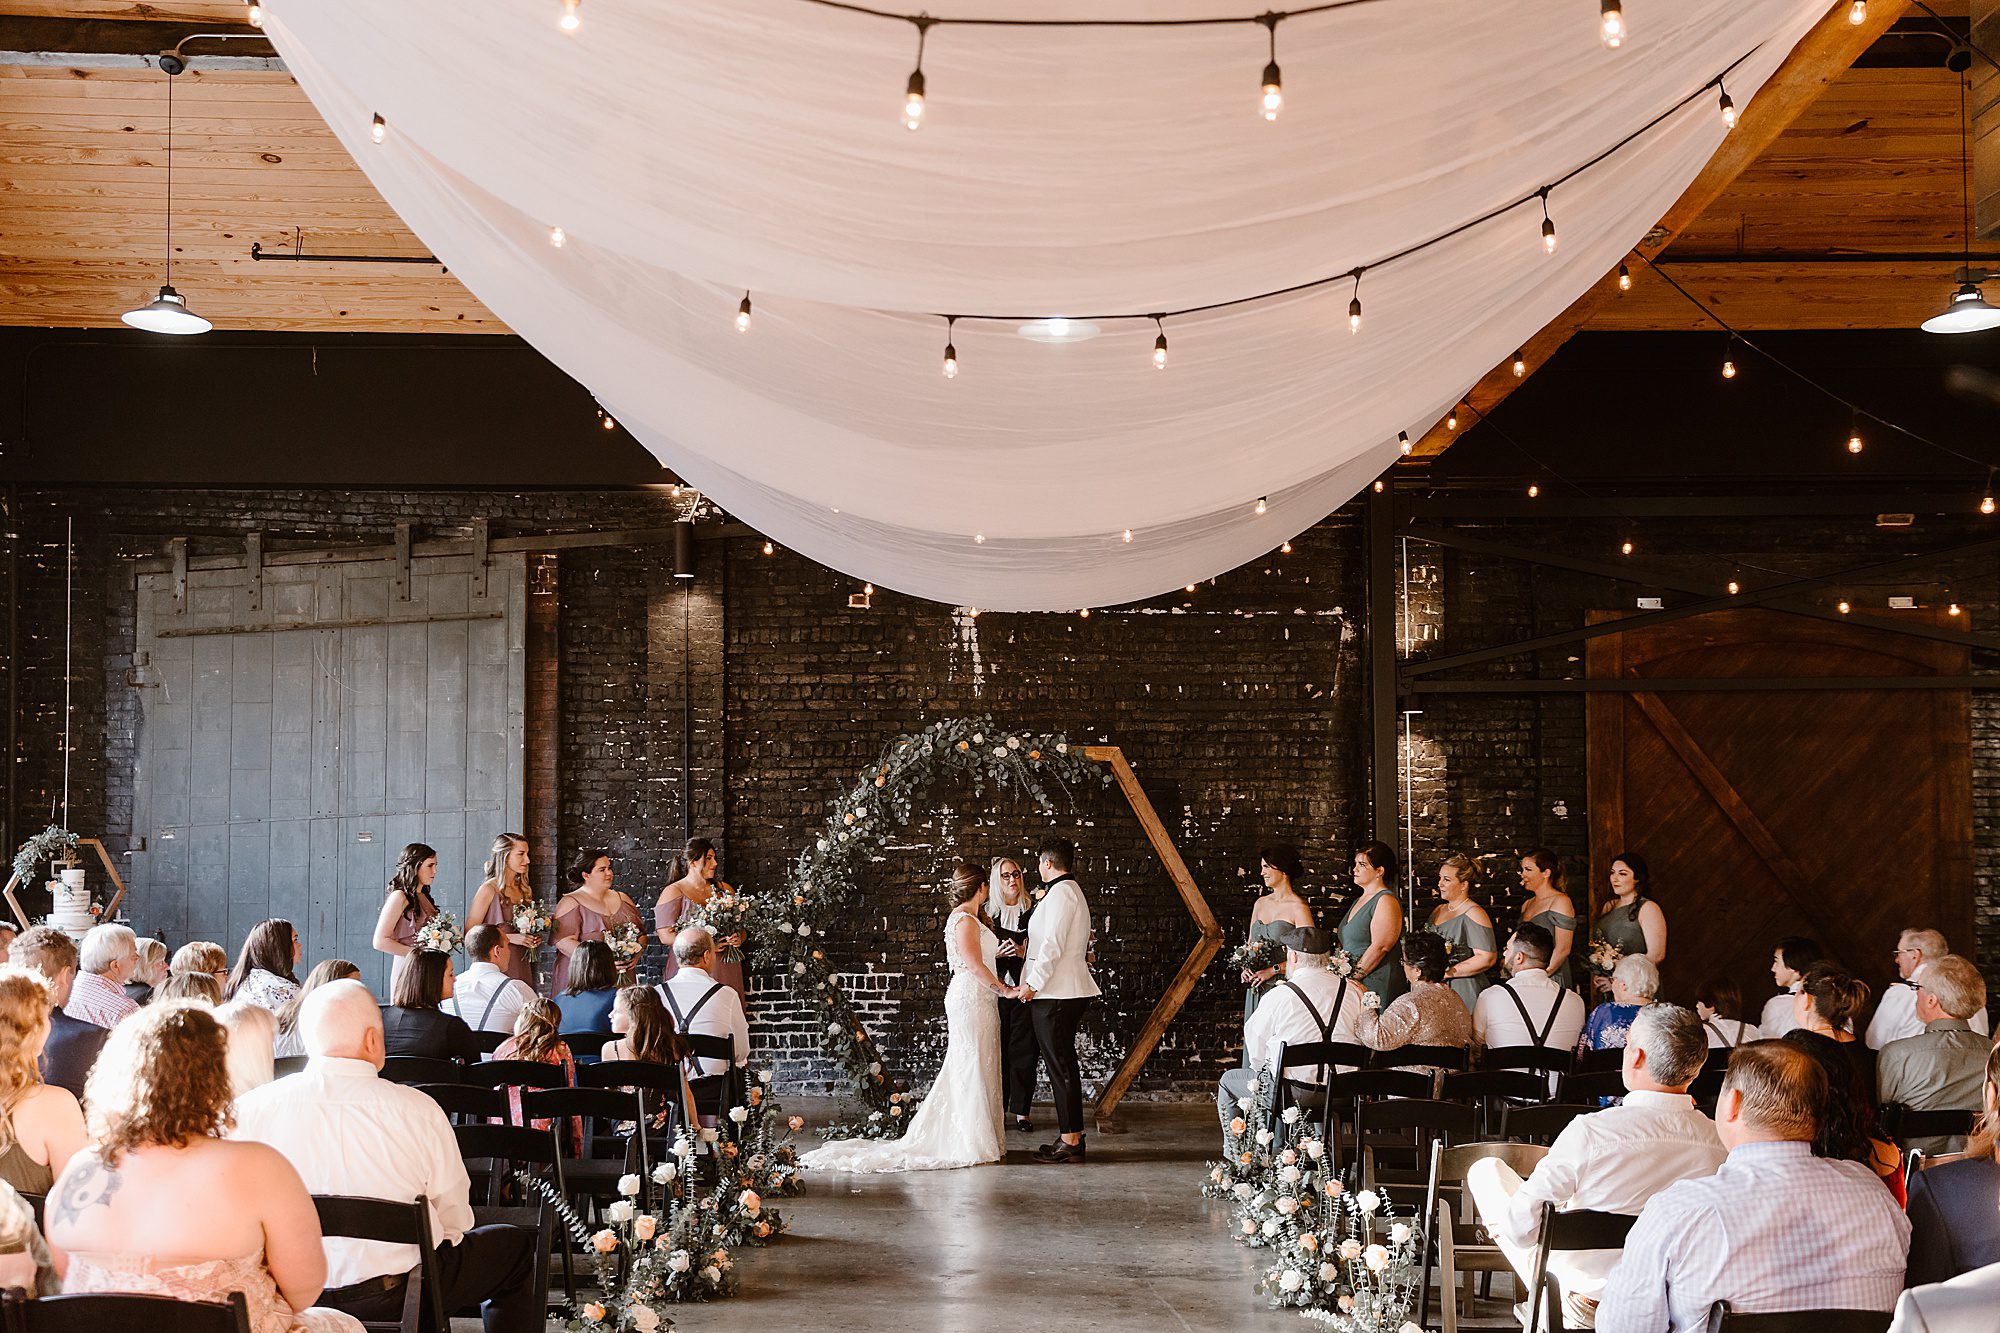 Revamped Railroad Depot Plays Host to Intimate Wedding